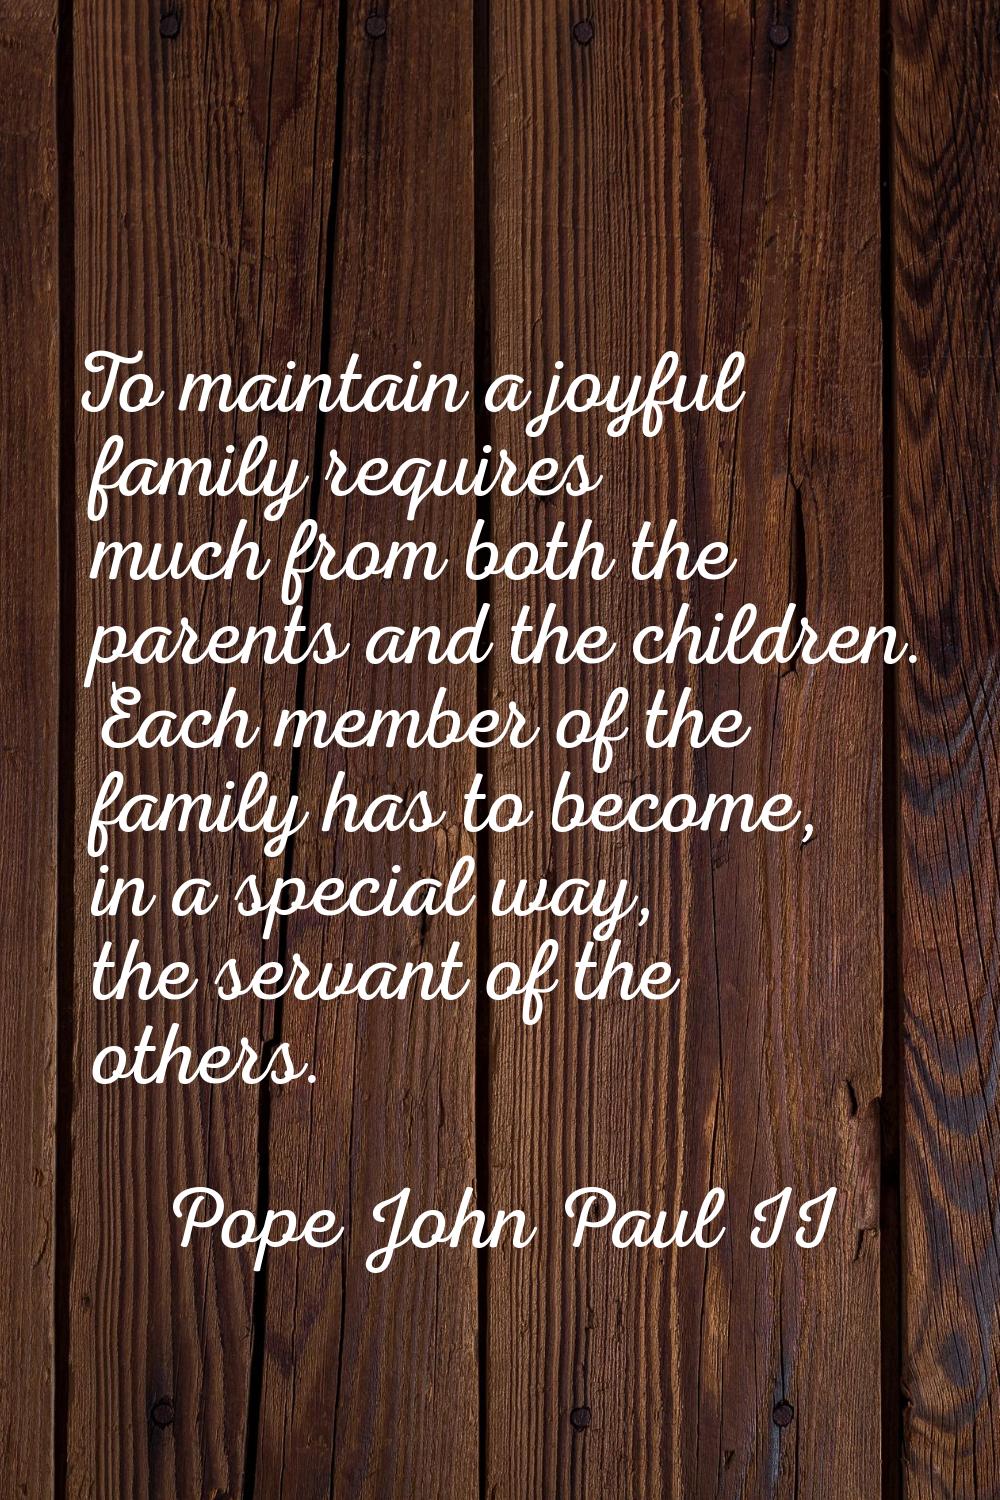 To maintain a joyful family requires much from both the parents and the children. Each member of th